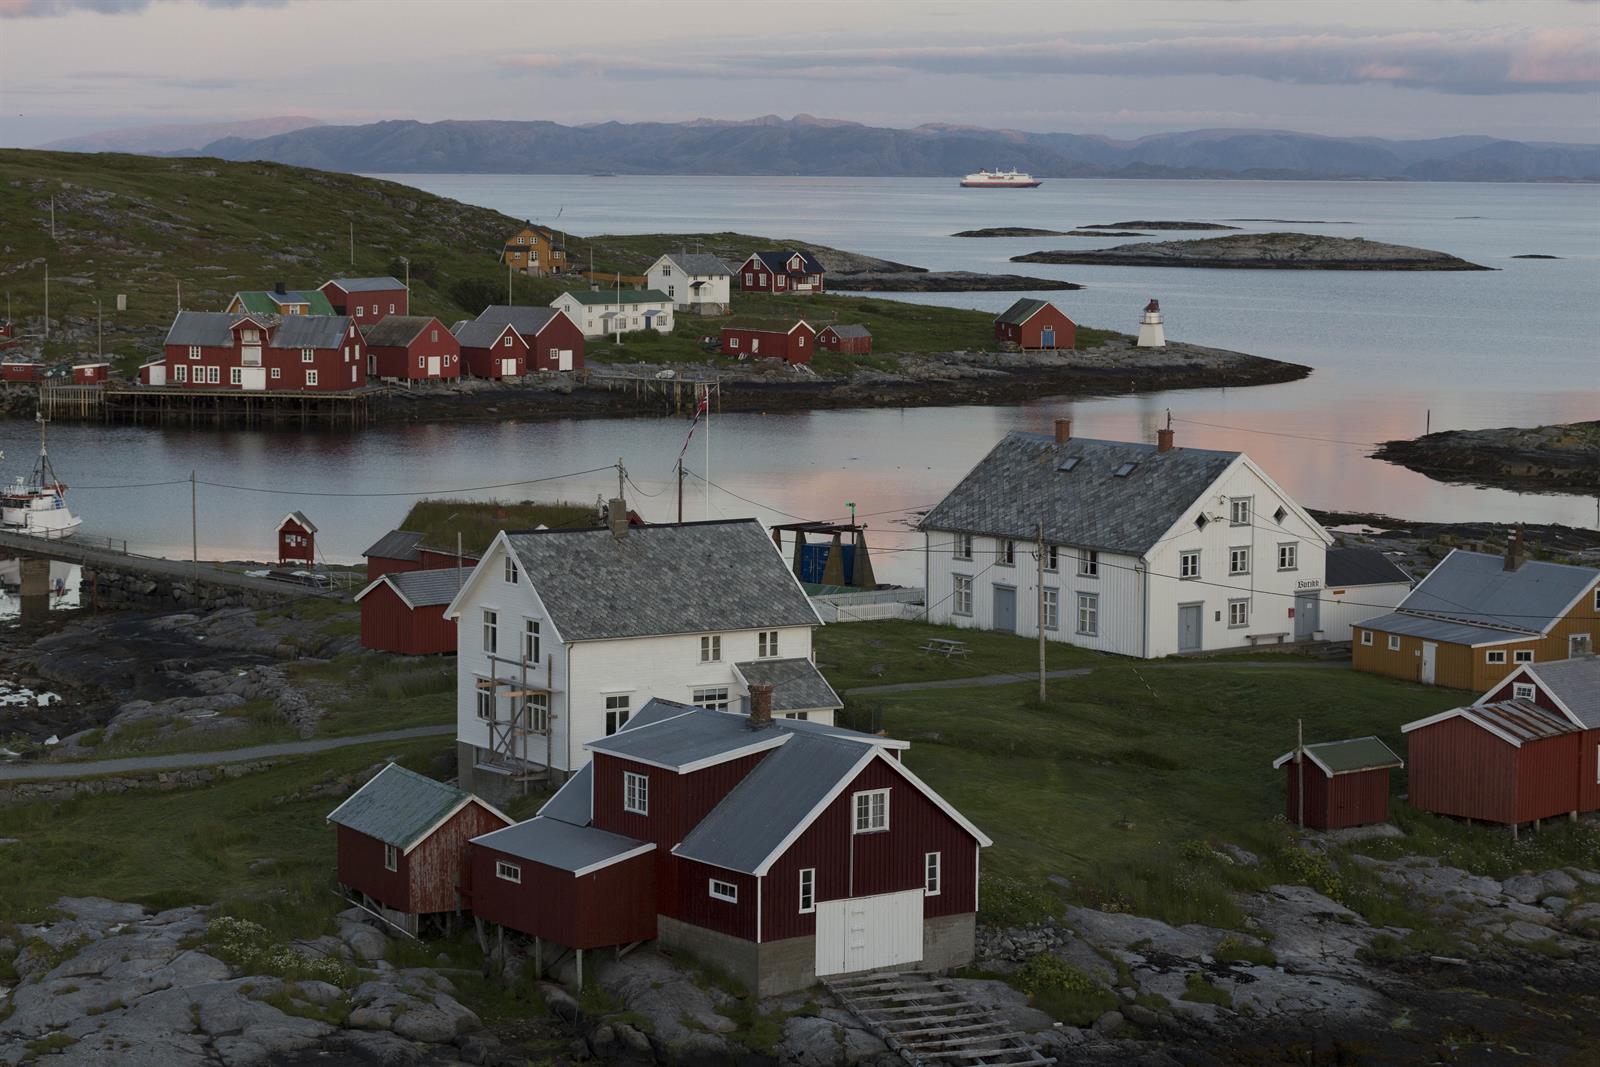 Stay overnight in a traditional fisherman's house/ rorbu in Sør-Gjæslingan fishing village